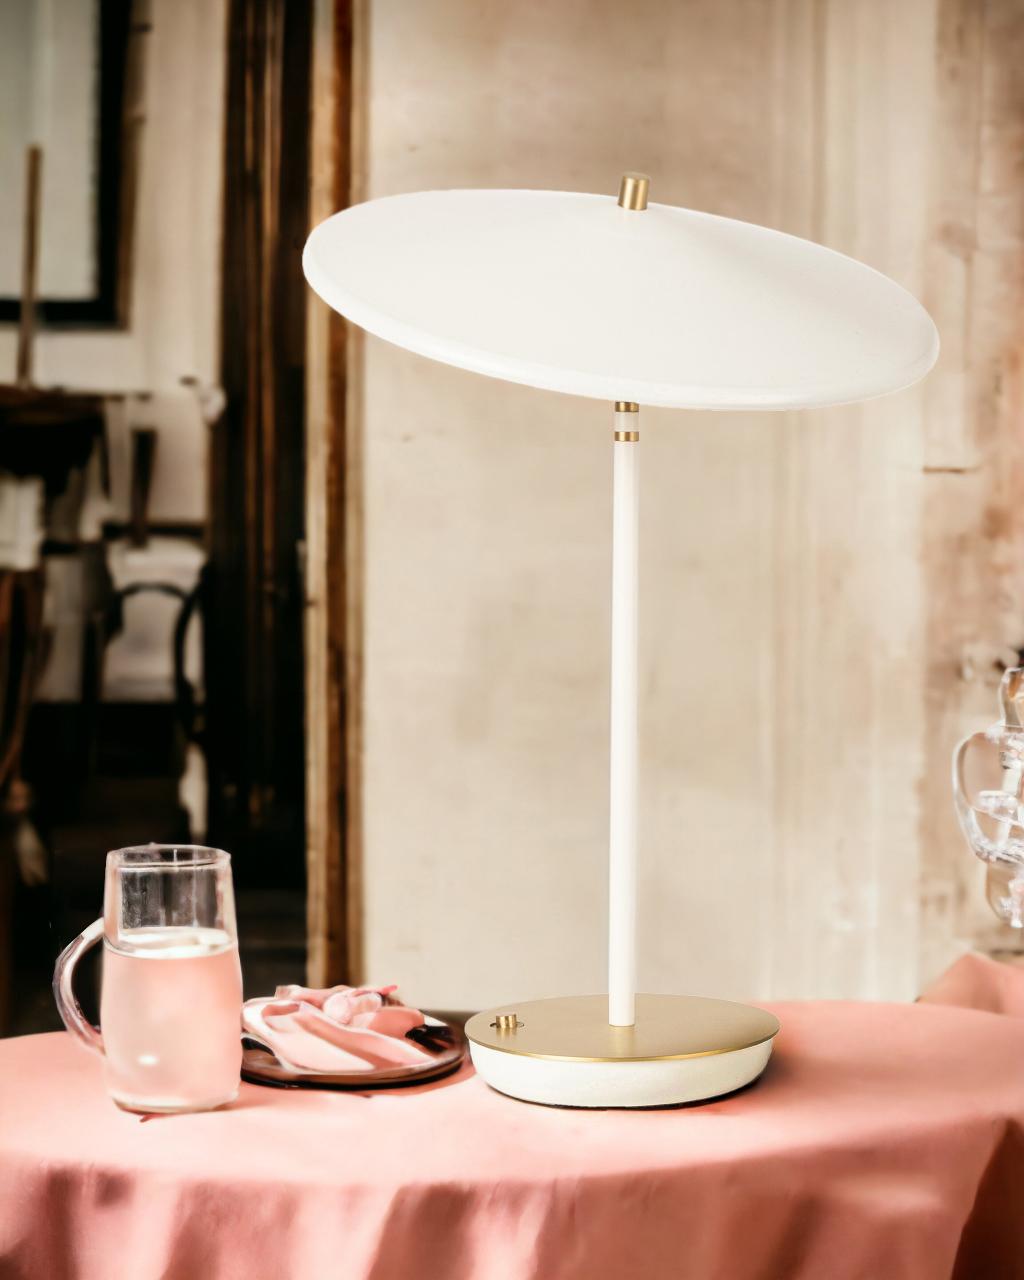 Materials: Brass (Satine Finish), Iron (With Electrostatic Paint)
Plug Type: EU Plug (US Adaptor Avaliable)
Voltage: 110-240V
Bulb: 3 WATT integrated LED
Light Color: 2700K

The serie is inspired by hanging French berets on 1920s hat store displays